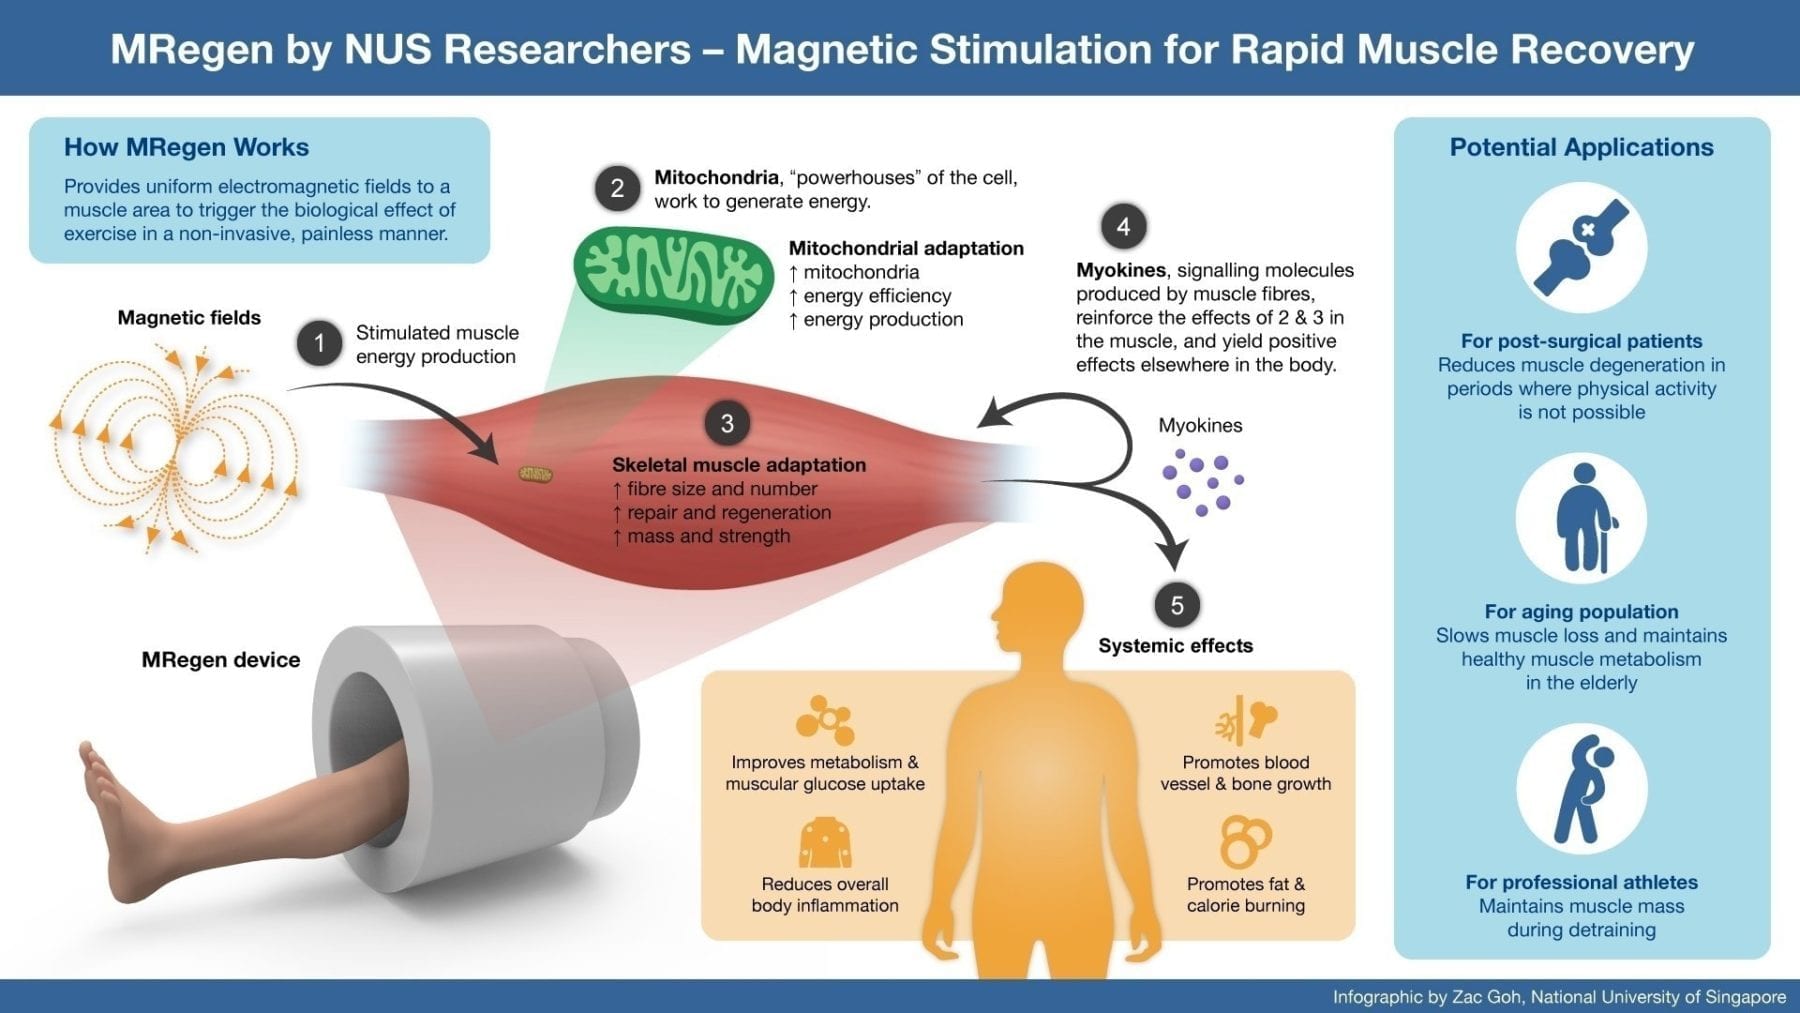 Using a magnetic field to speed up muscle recovery